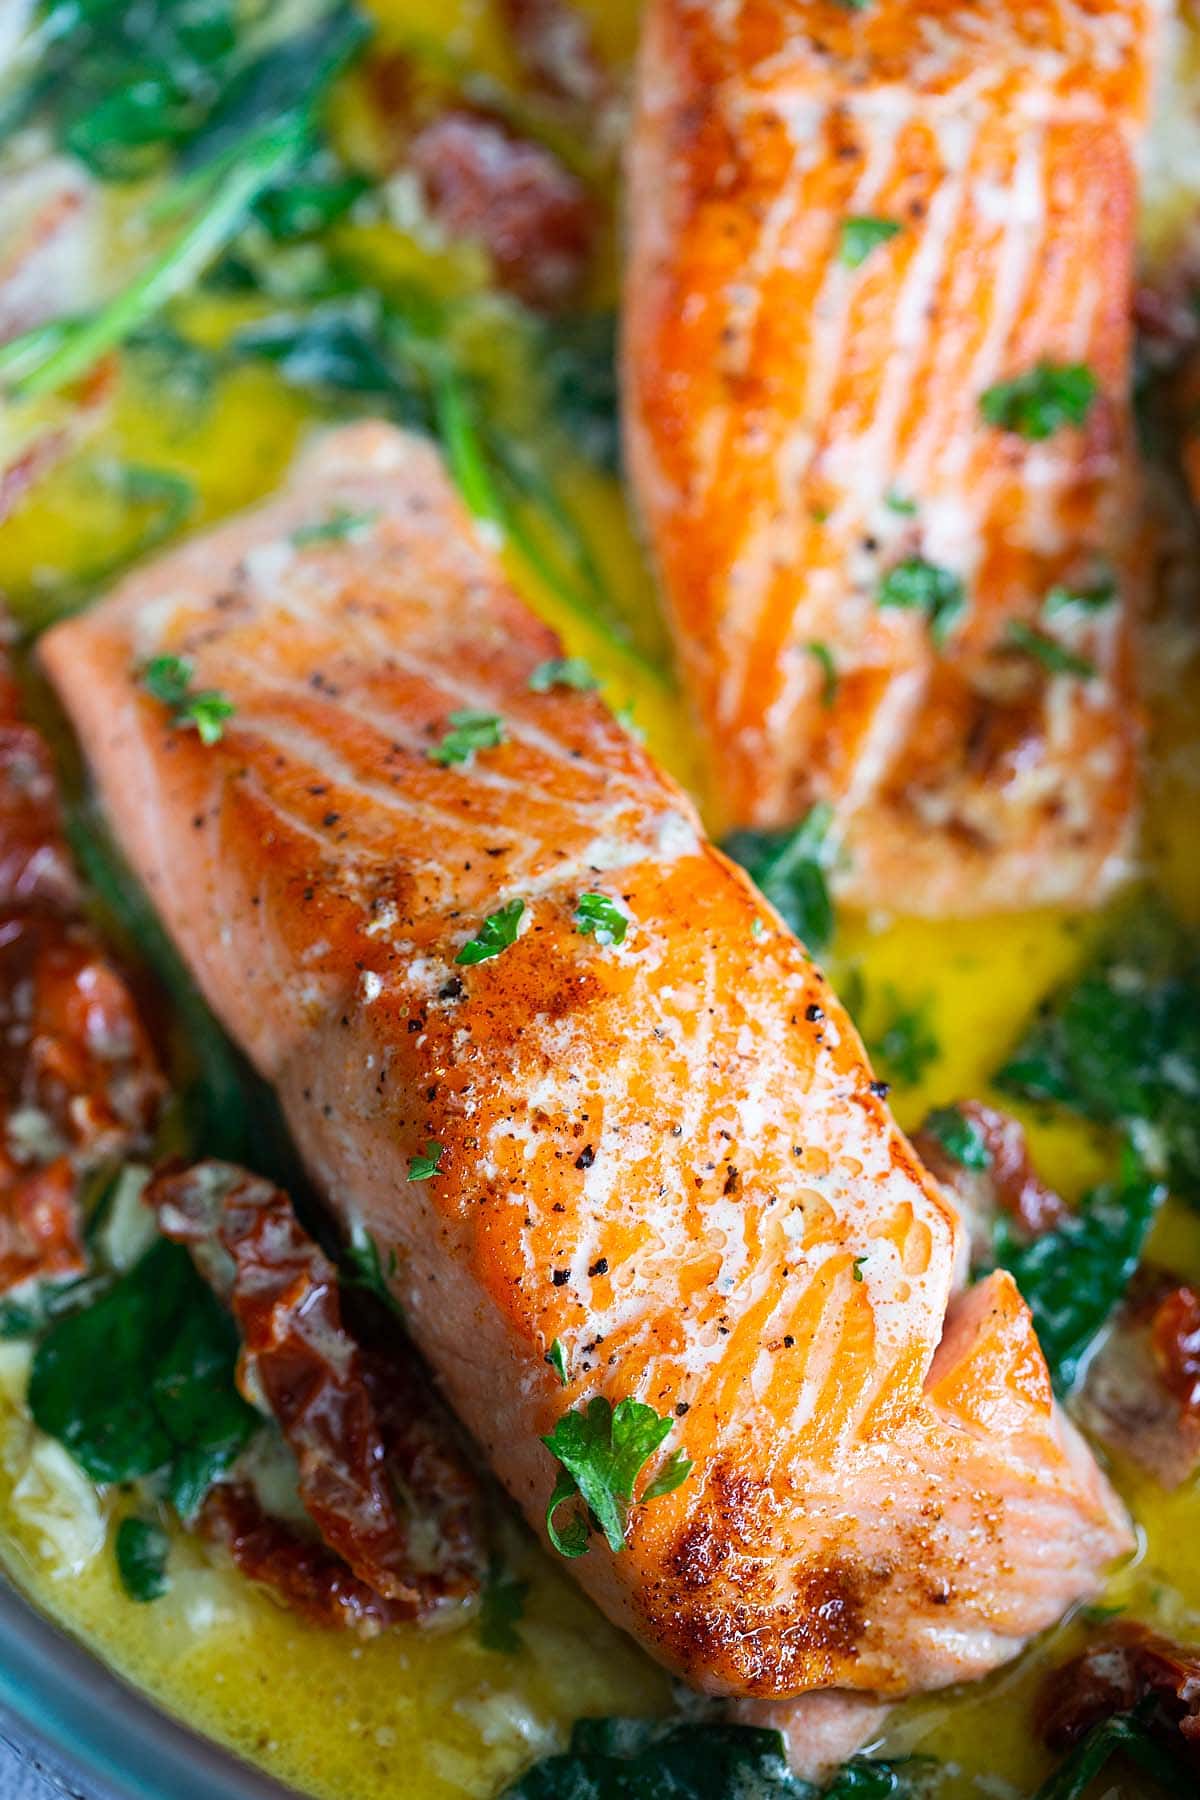 Grilled salmon in creamy sauce, ready to serve.